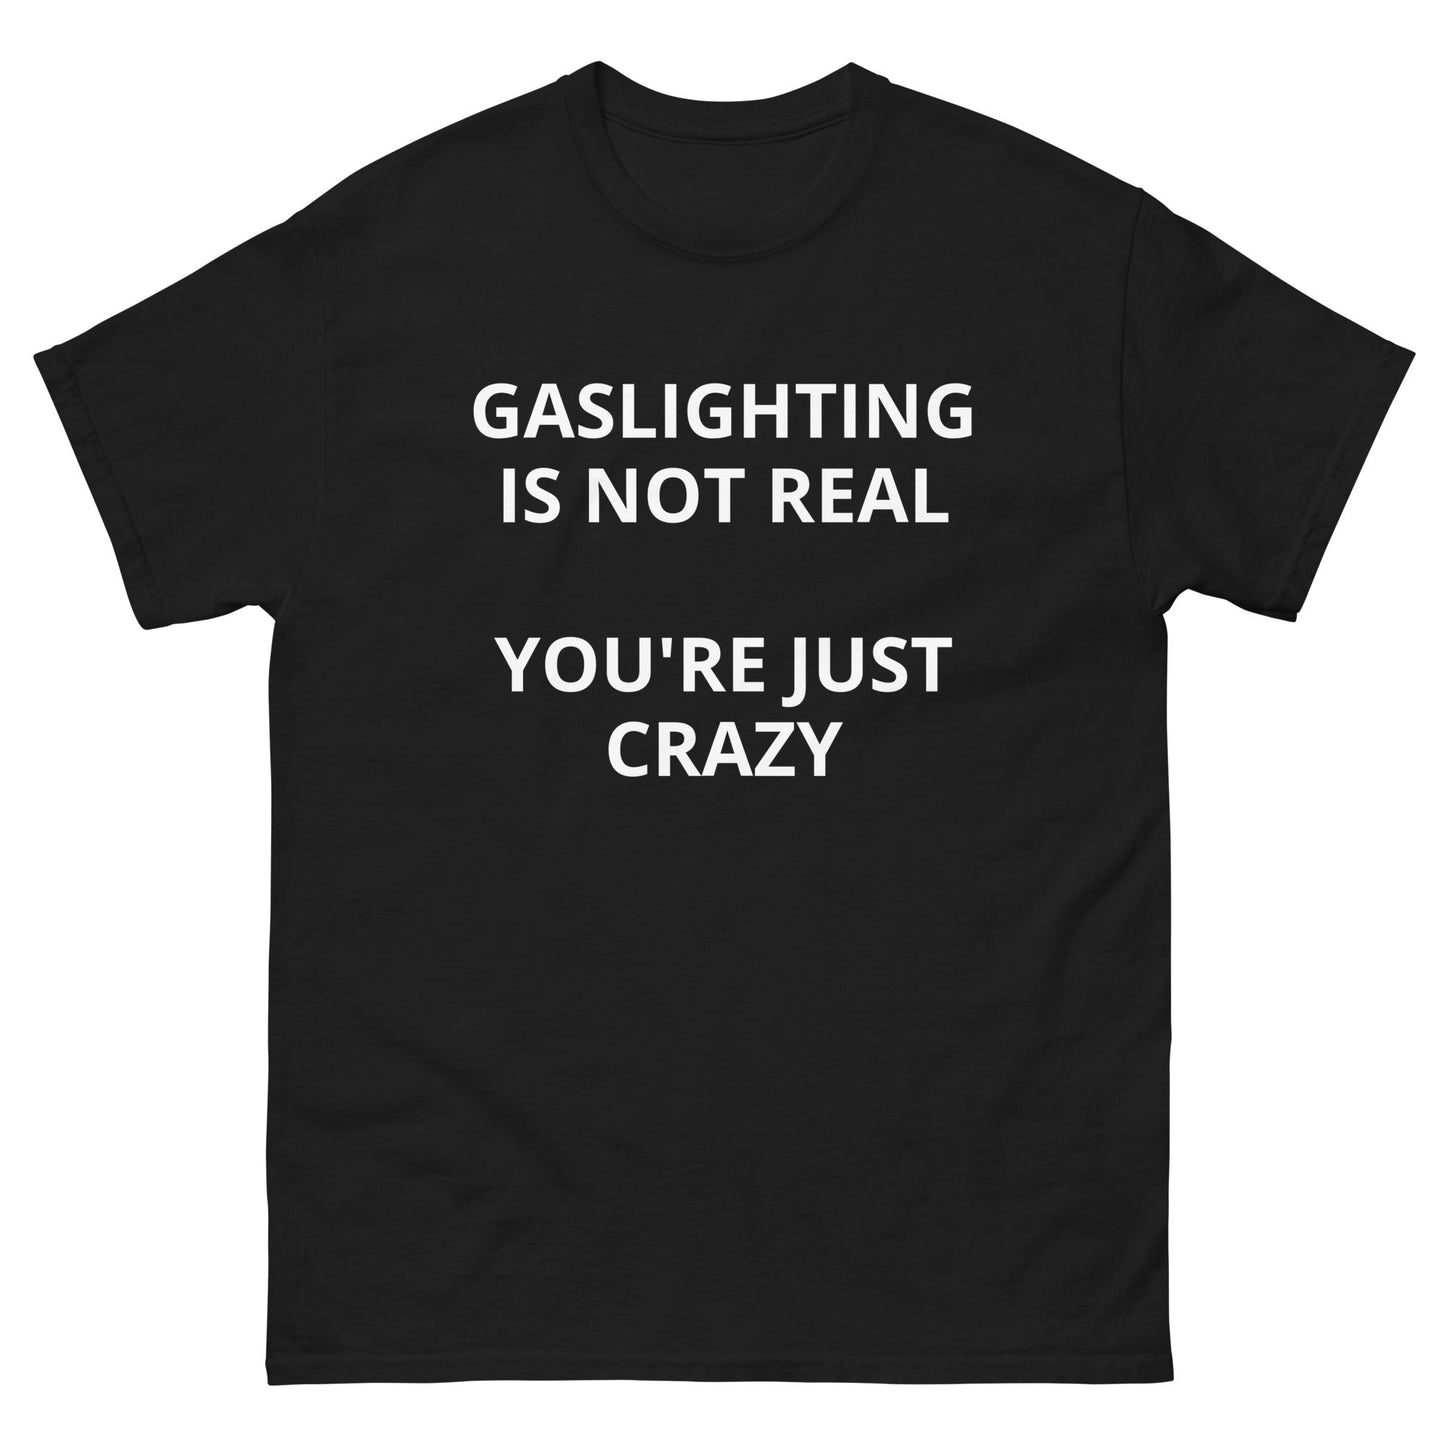 GASLIGHTING IS NOT REAL YOU'RE JUST CRAZY - HardShirts